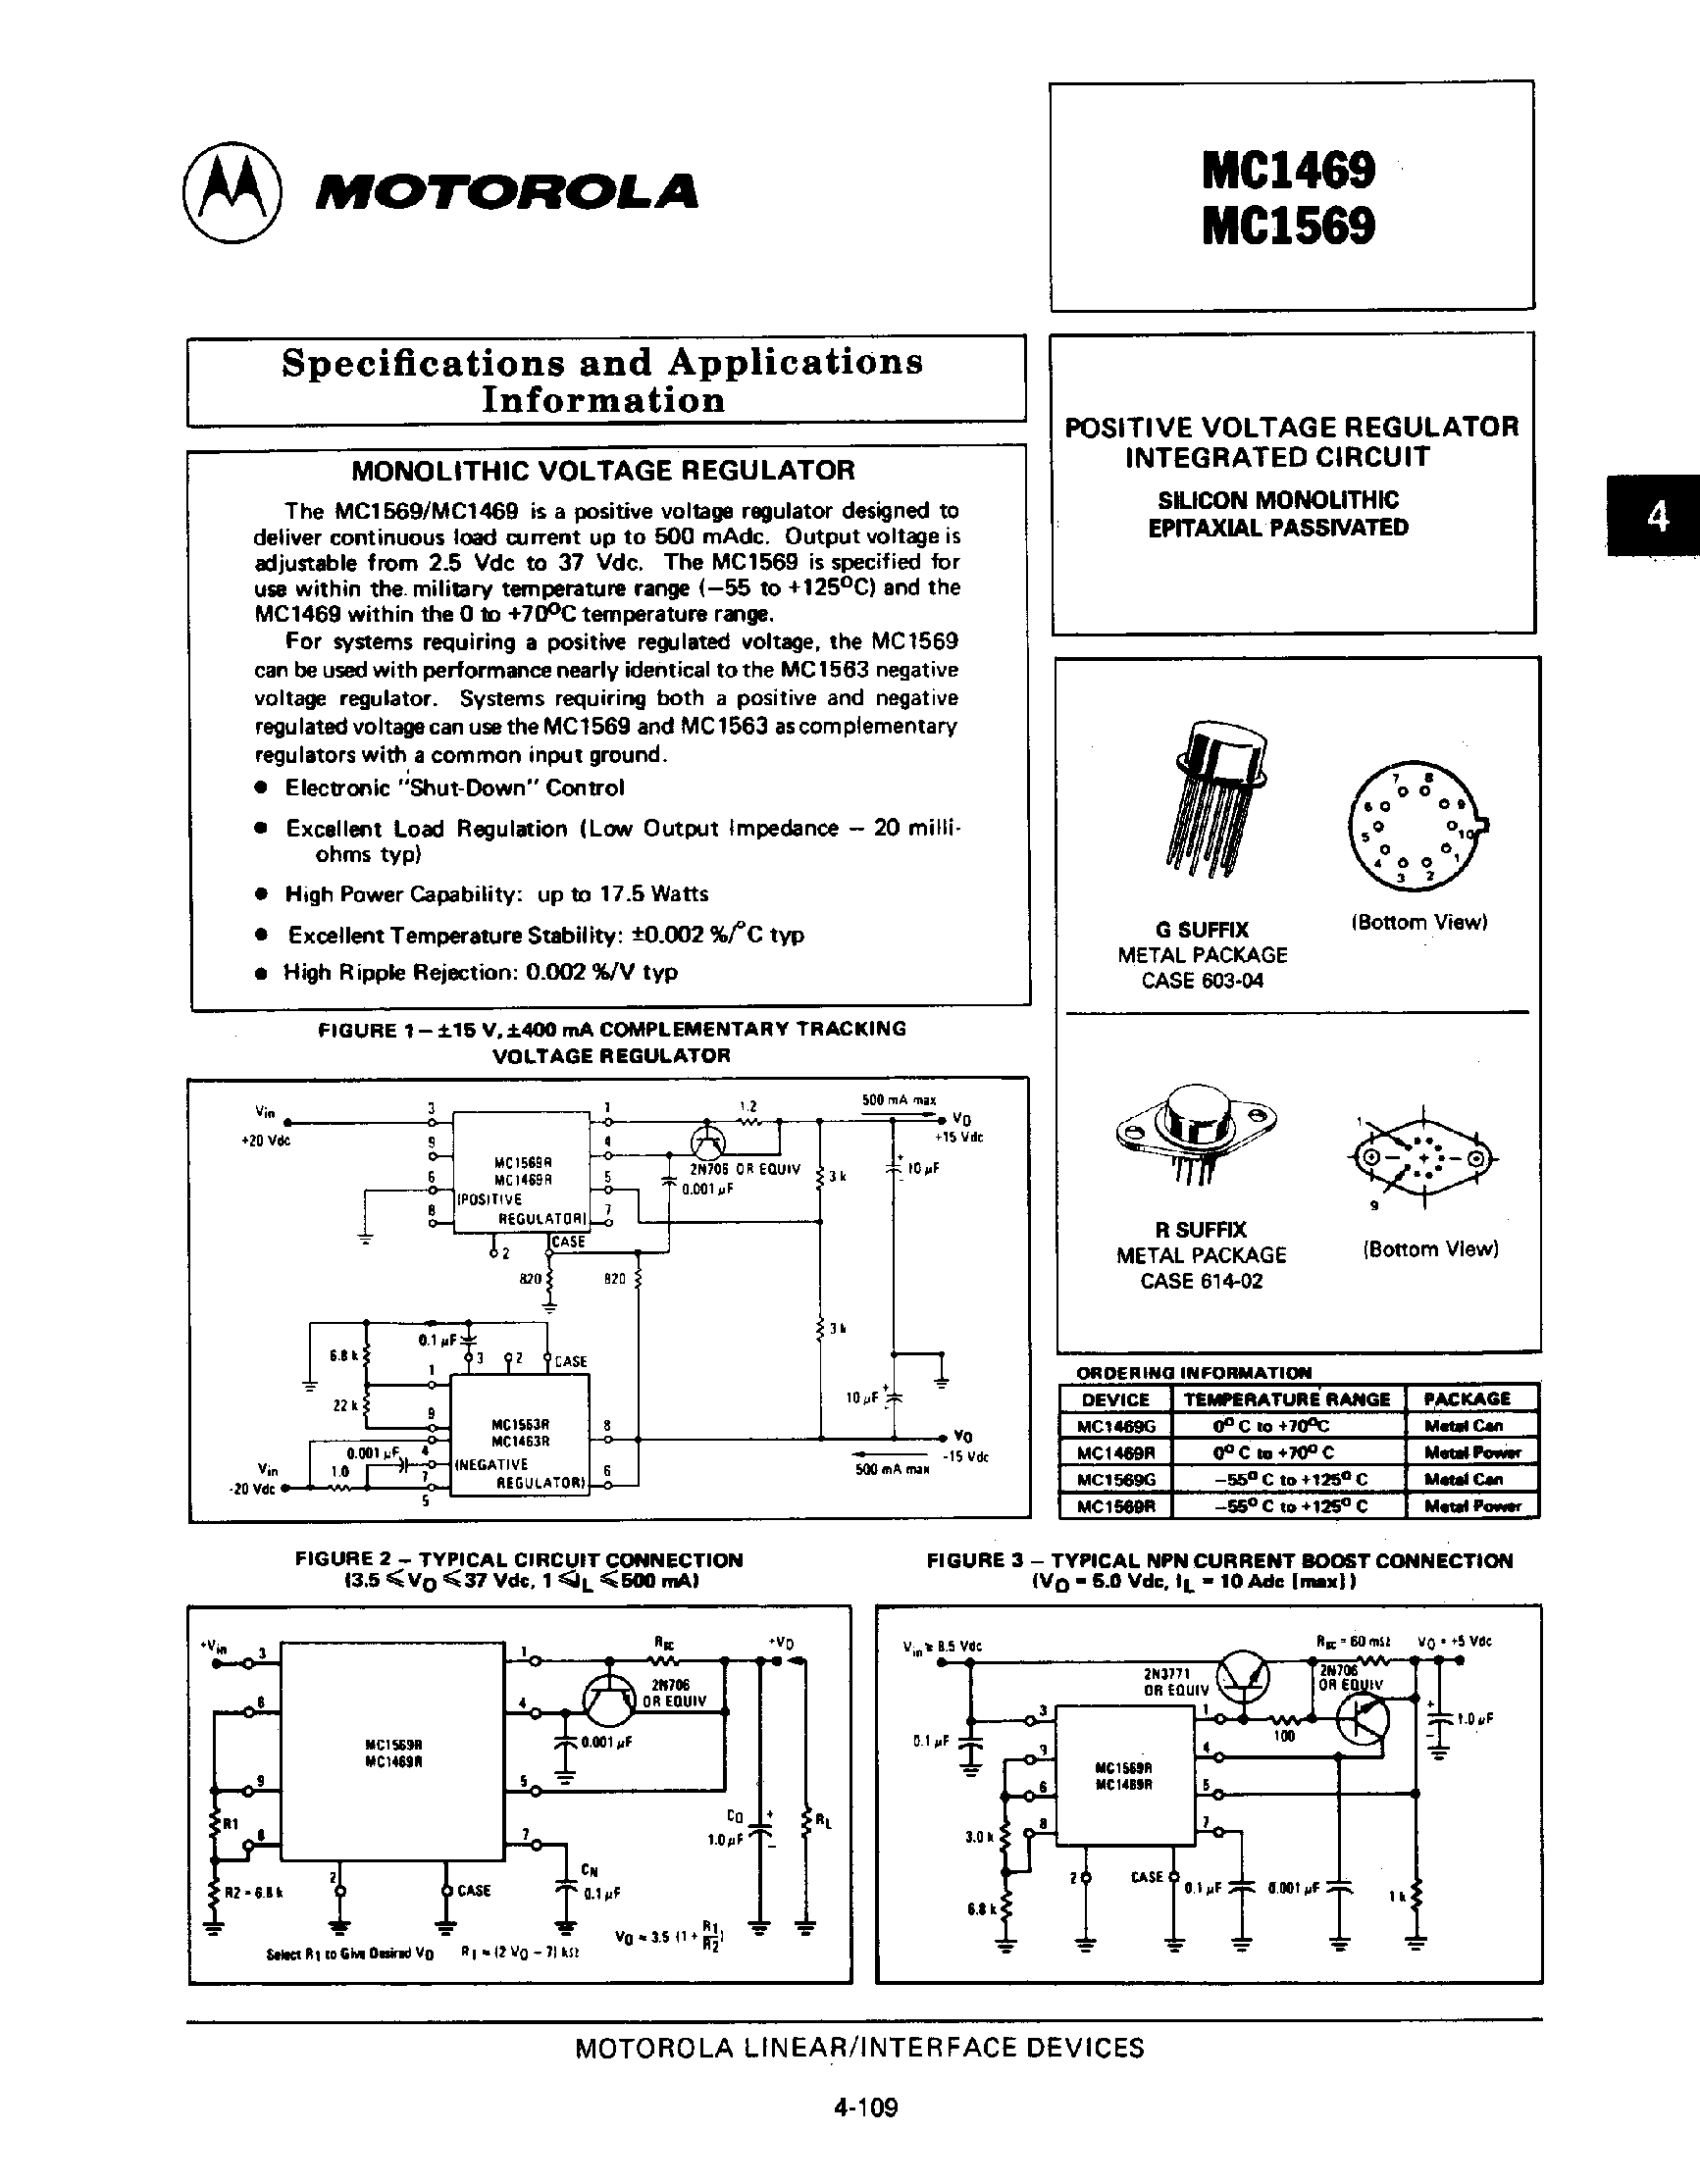 Datasheet MC1469 - Specifications and Applications Information page 1